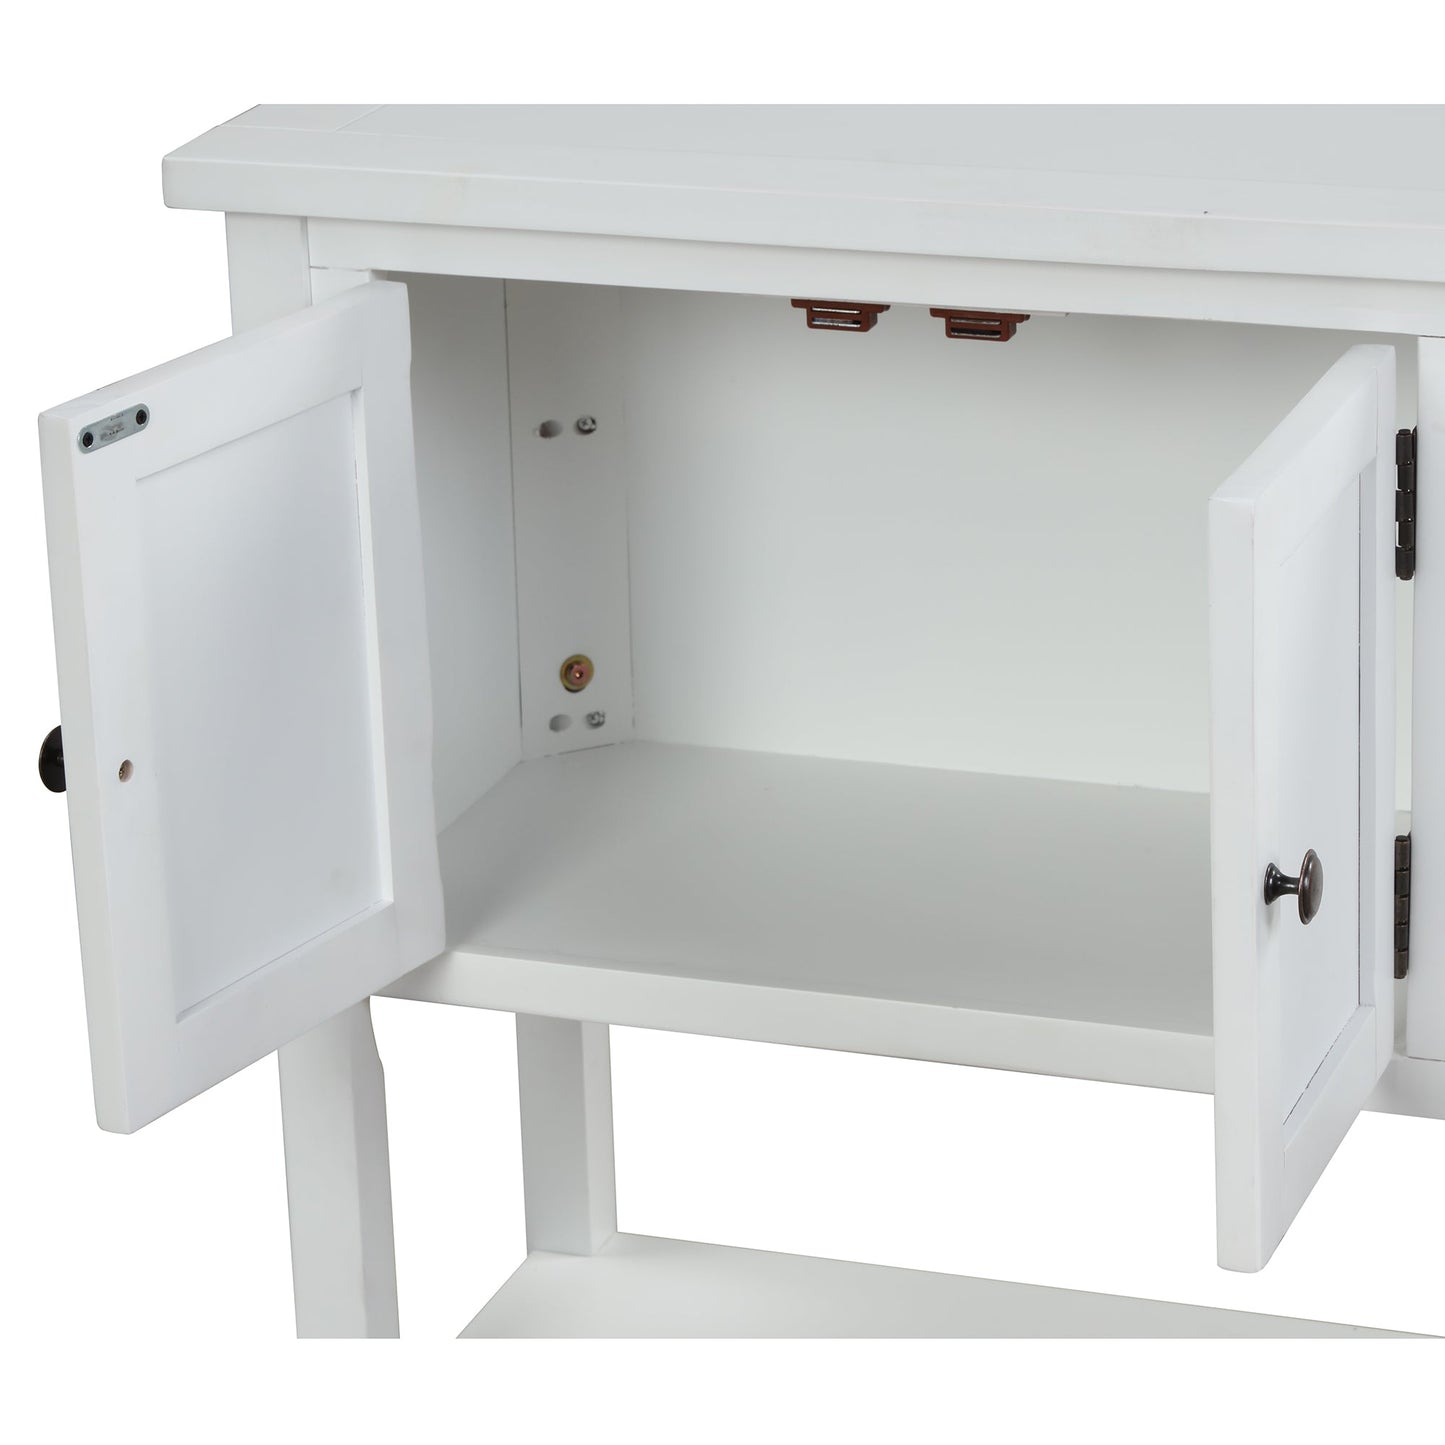 Modern Console Table with 2 Drawers, 1 Cabinet and 1 Shelf White - Demine Essentials